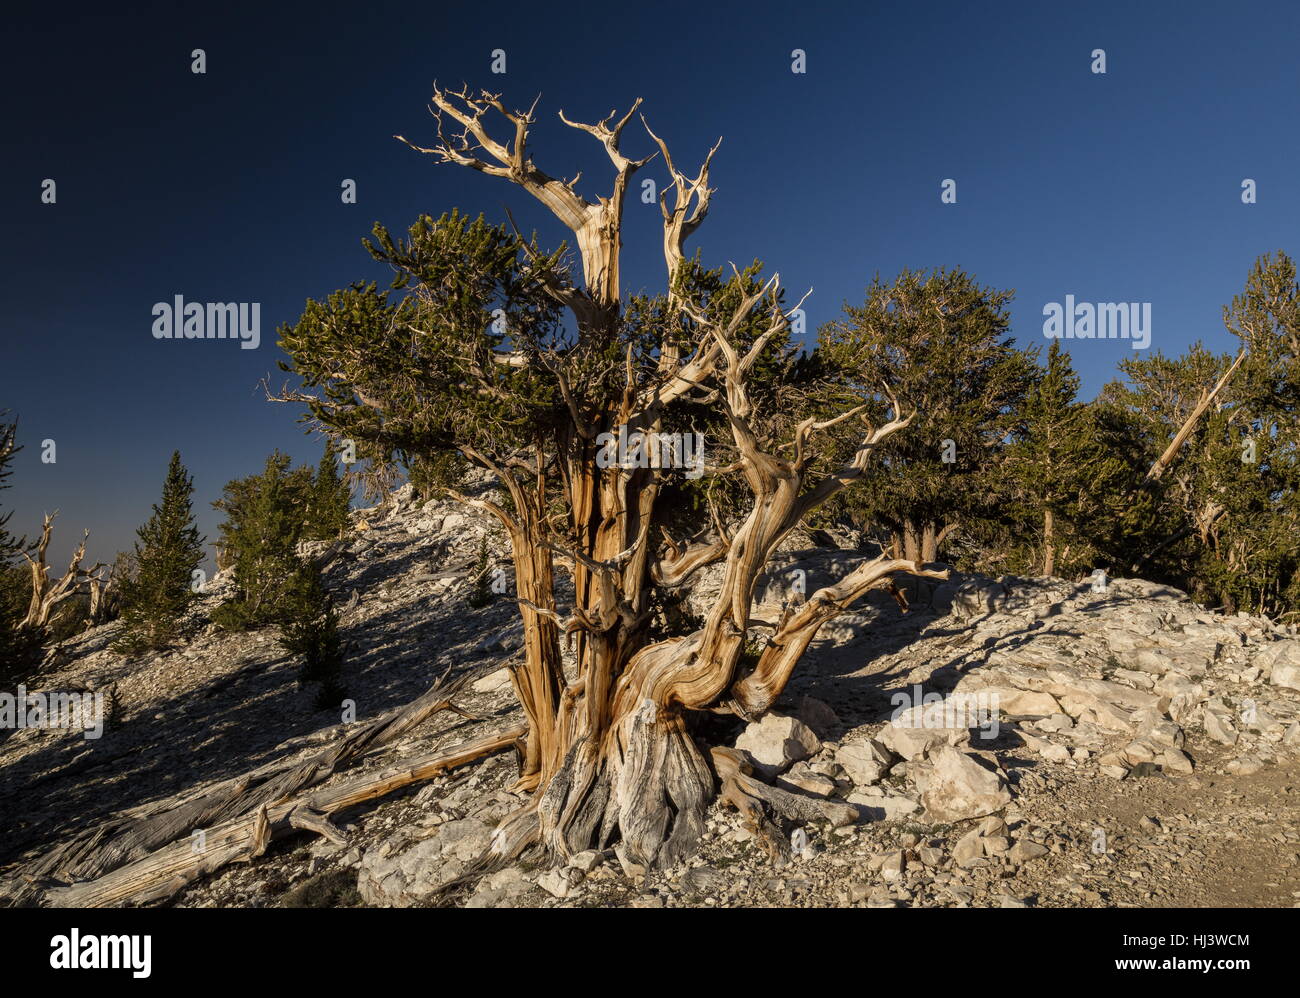 Great Basin bristlecone pine or Bristlecone pine, Pinus longaeva, in the White Mountains, California. The oldest known trees in the world. Stock Photo